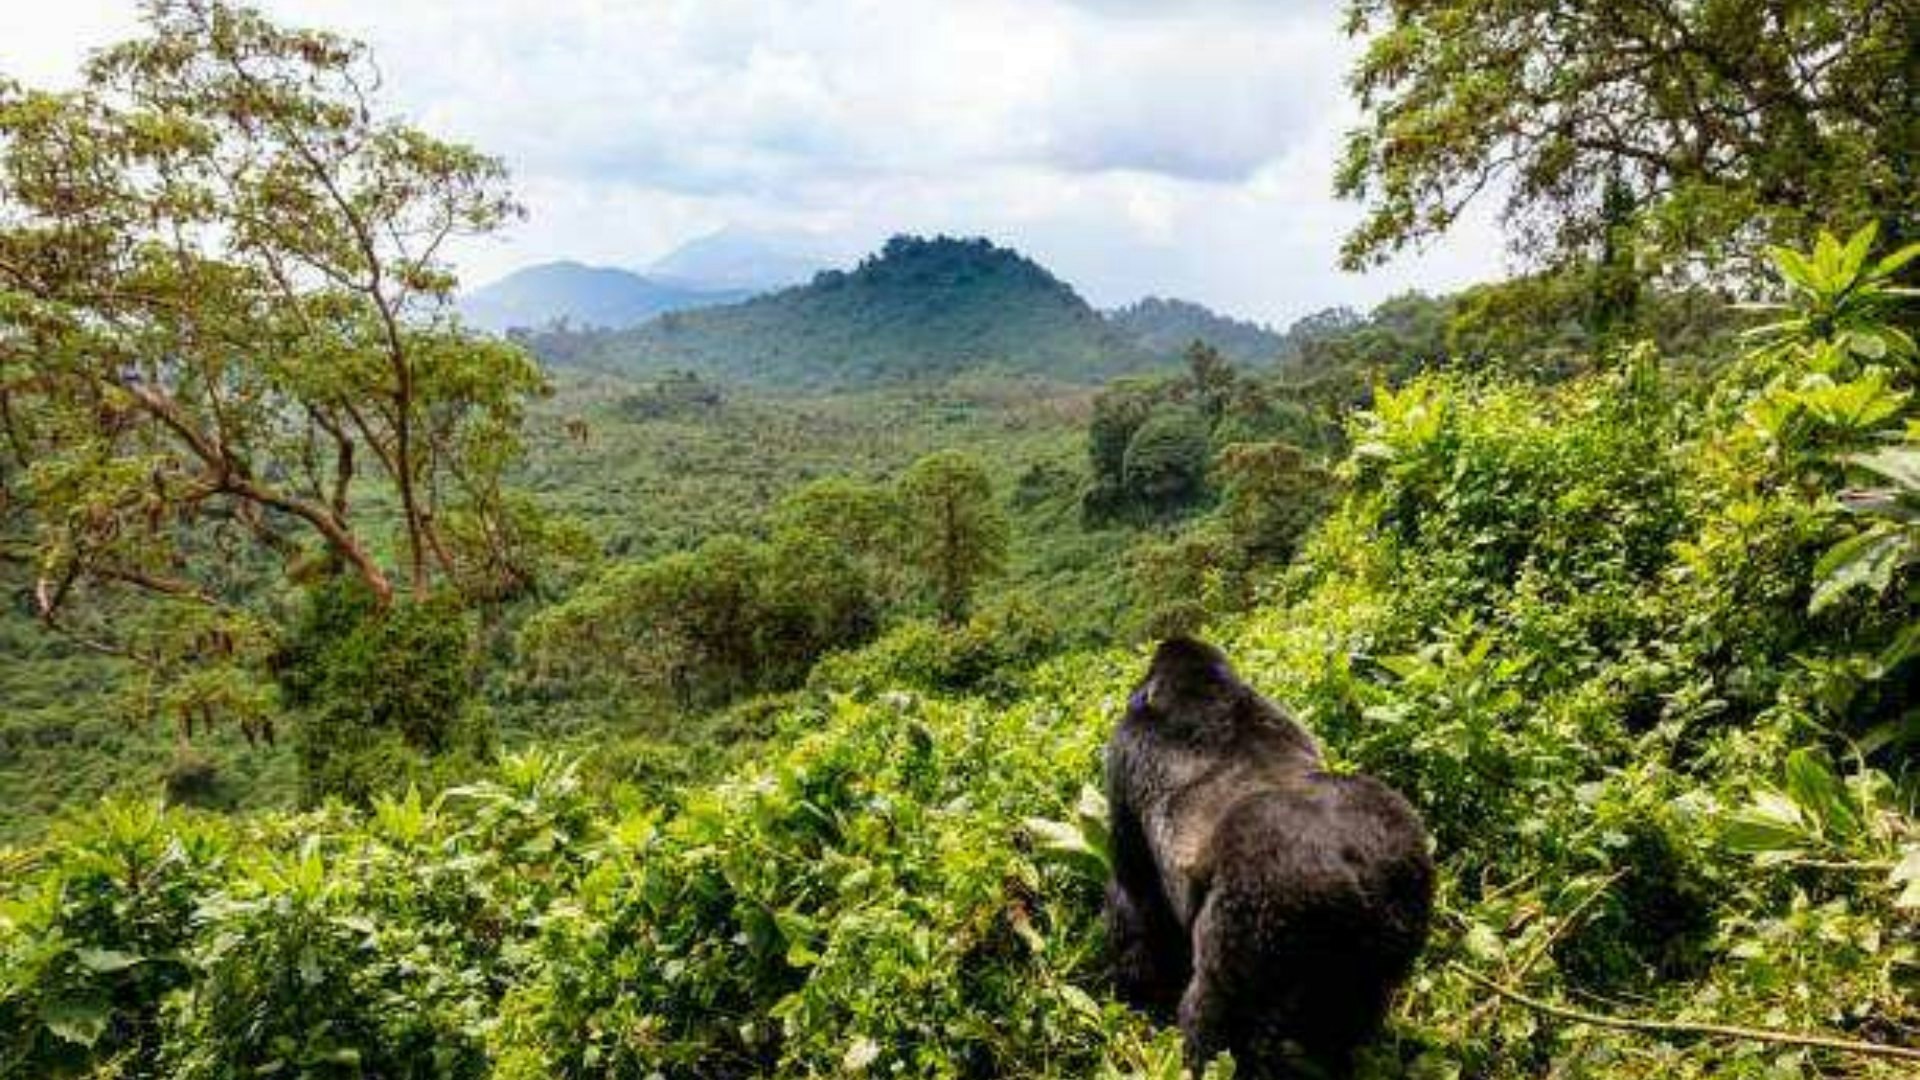 The beautiful and lush jungles of Rwanda are home to gorillas and other wildlife. A pair of Wind River Indian Reservation teachers will travel there in July to study the country's 1994 genocide that left nearly 800,000 people dead.